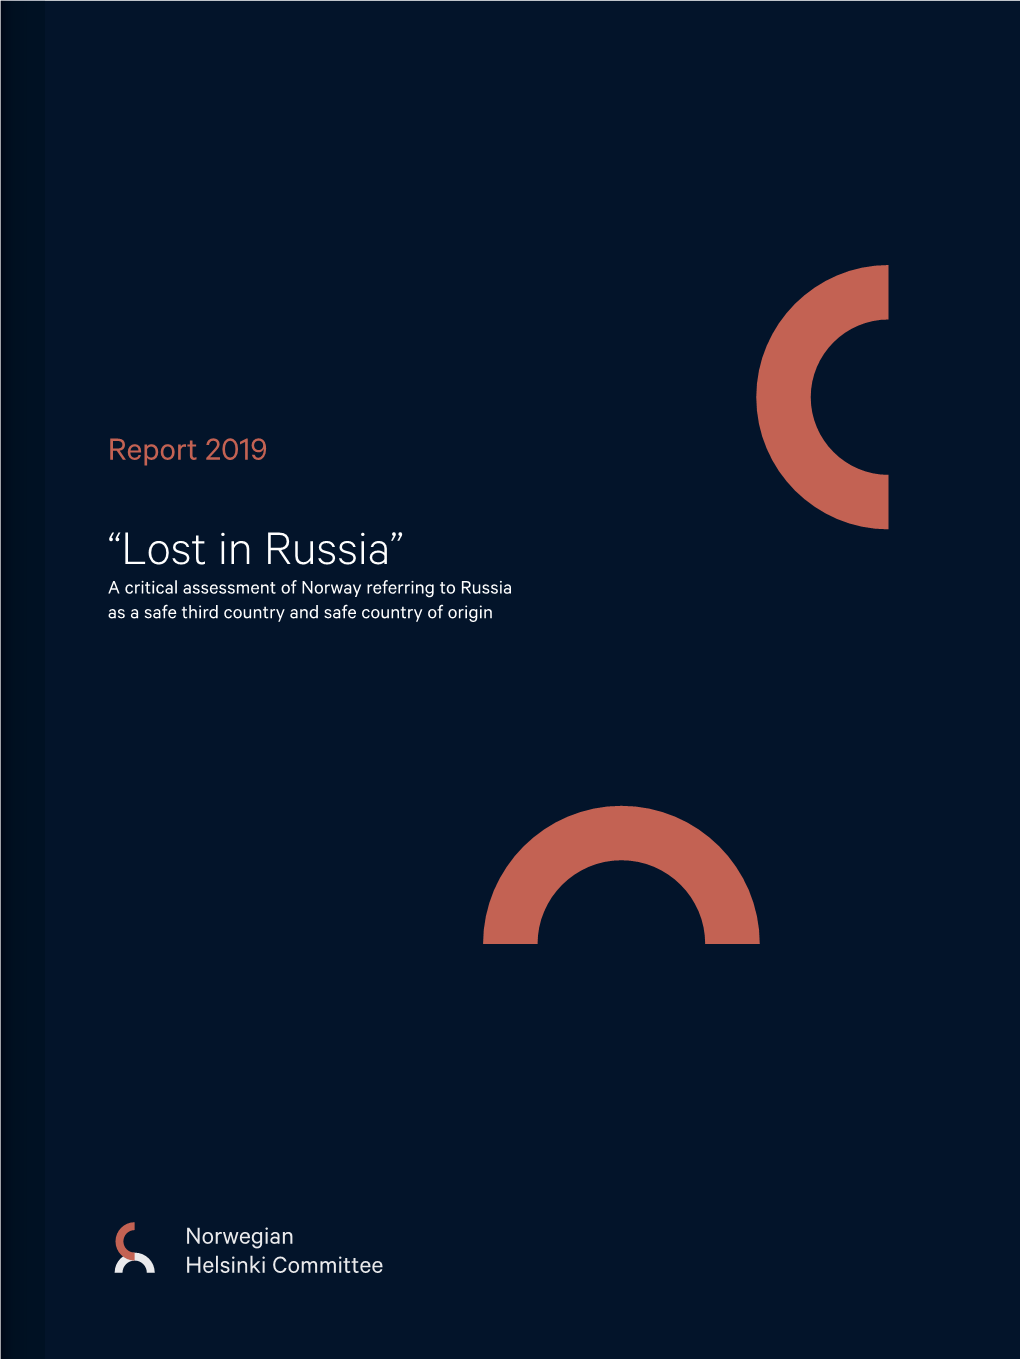 “Lost in Russia” a Critical Assessment of Norway Referring to Russia As a Safe Third Country and Safe Country of Origin